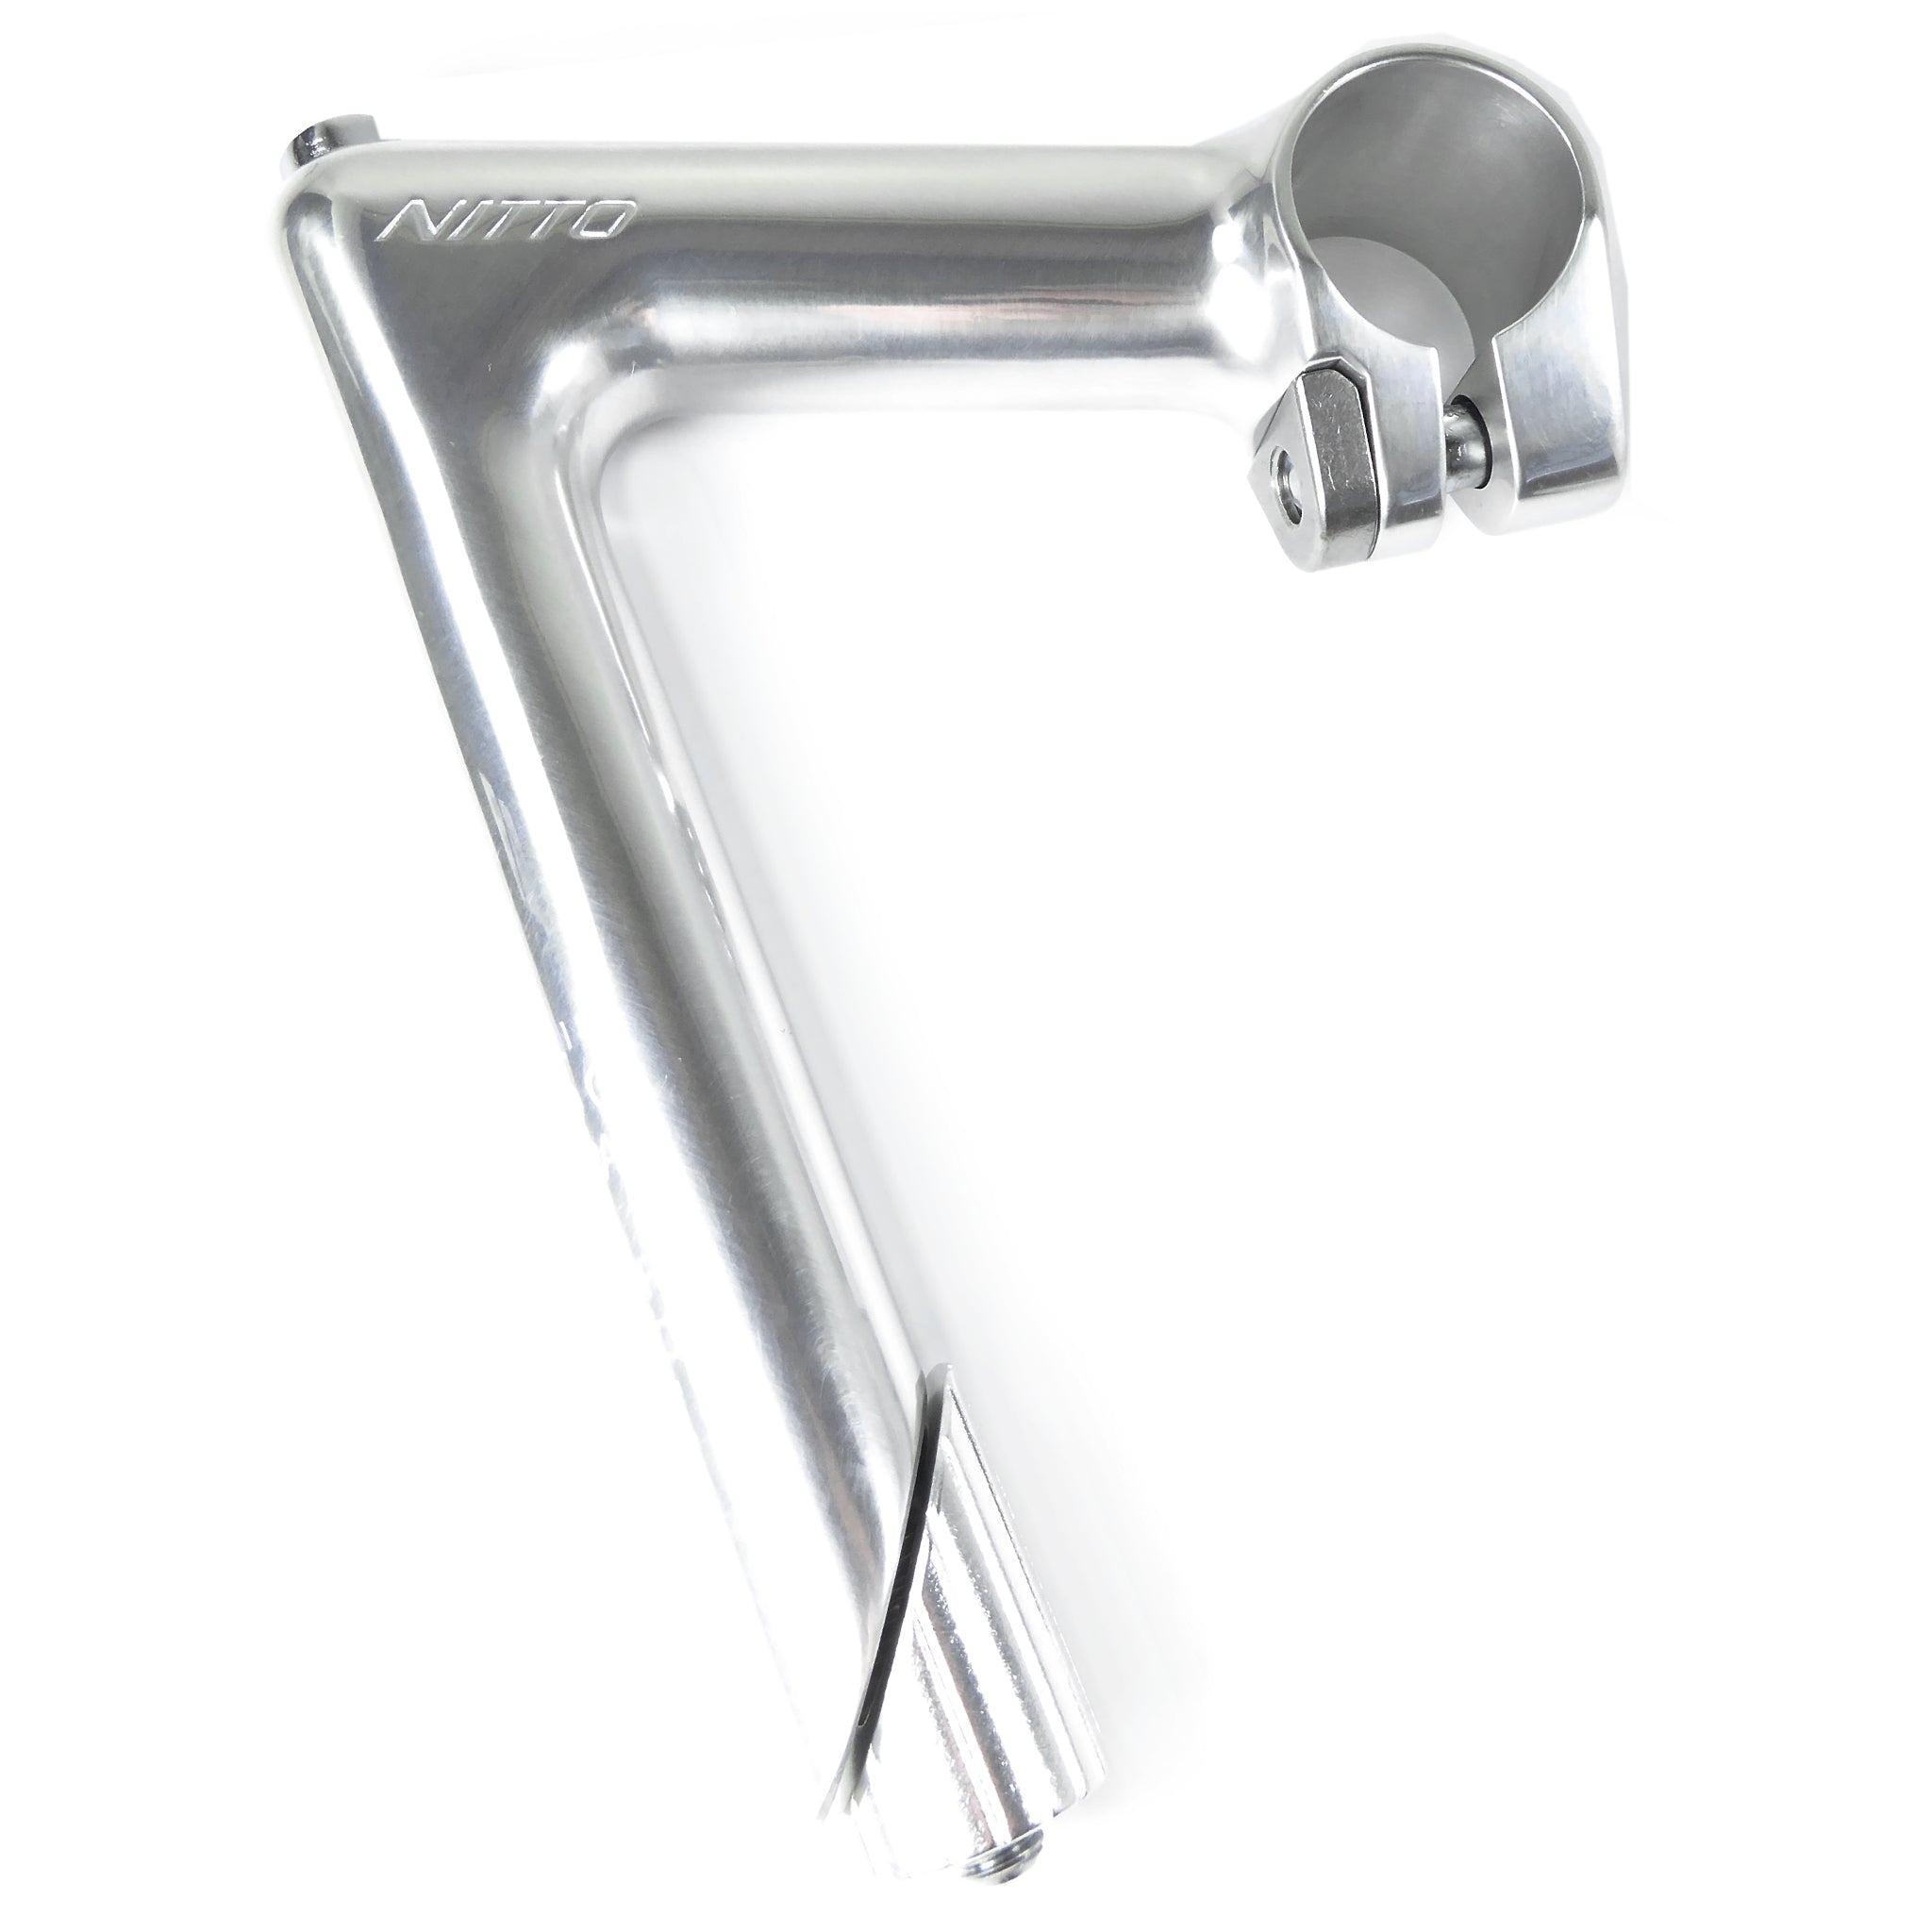 Classic Nitto NP 26.0 Clamp x 1" Diameter Threaded Quill Stem - The Bikesmiths